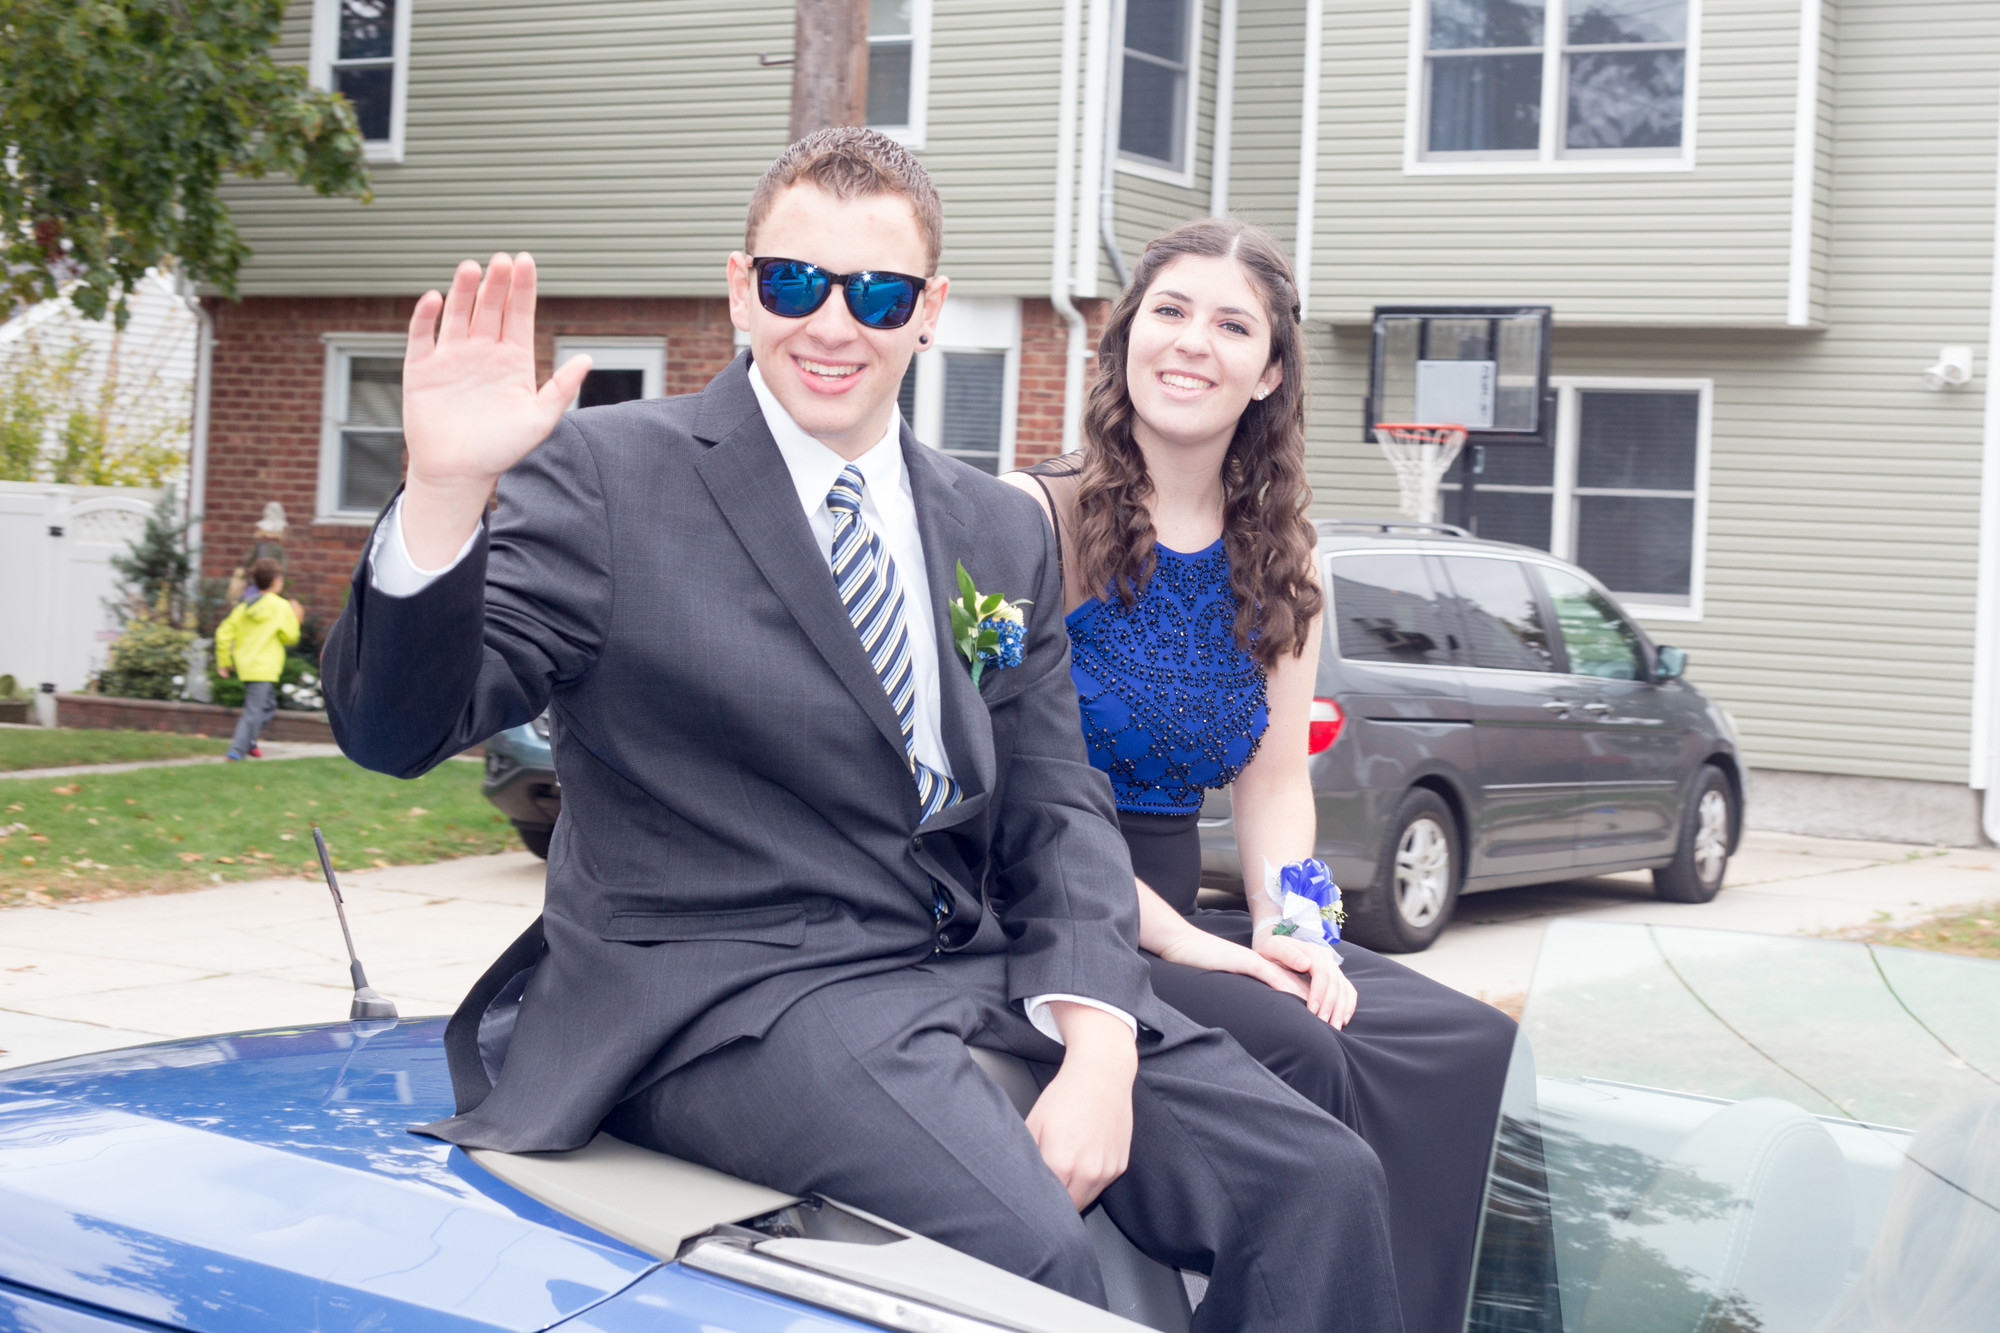 William Krutino and Danielle Levy were part of the Homecoming Court.